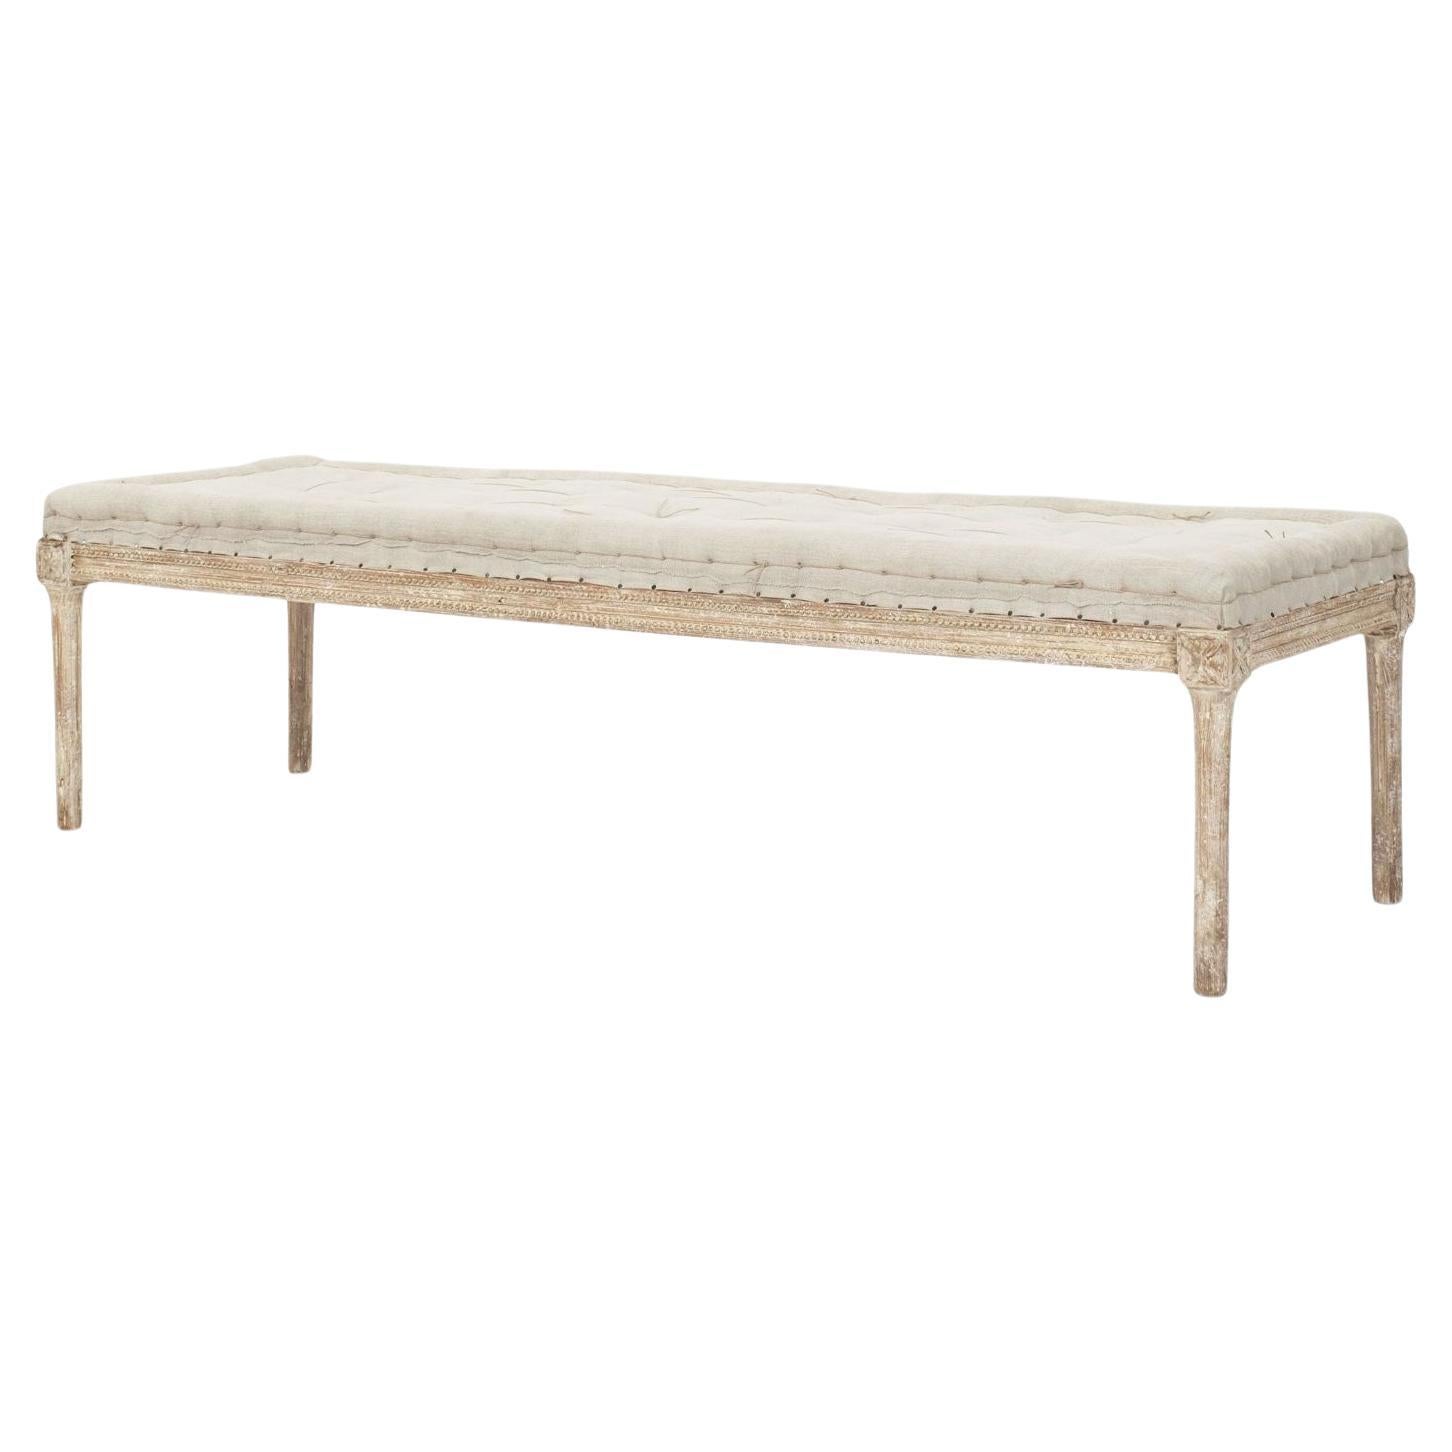 Painted Gustavian Bench Raised upon Tapered Fluted Legs